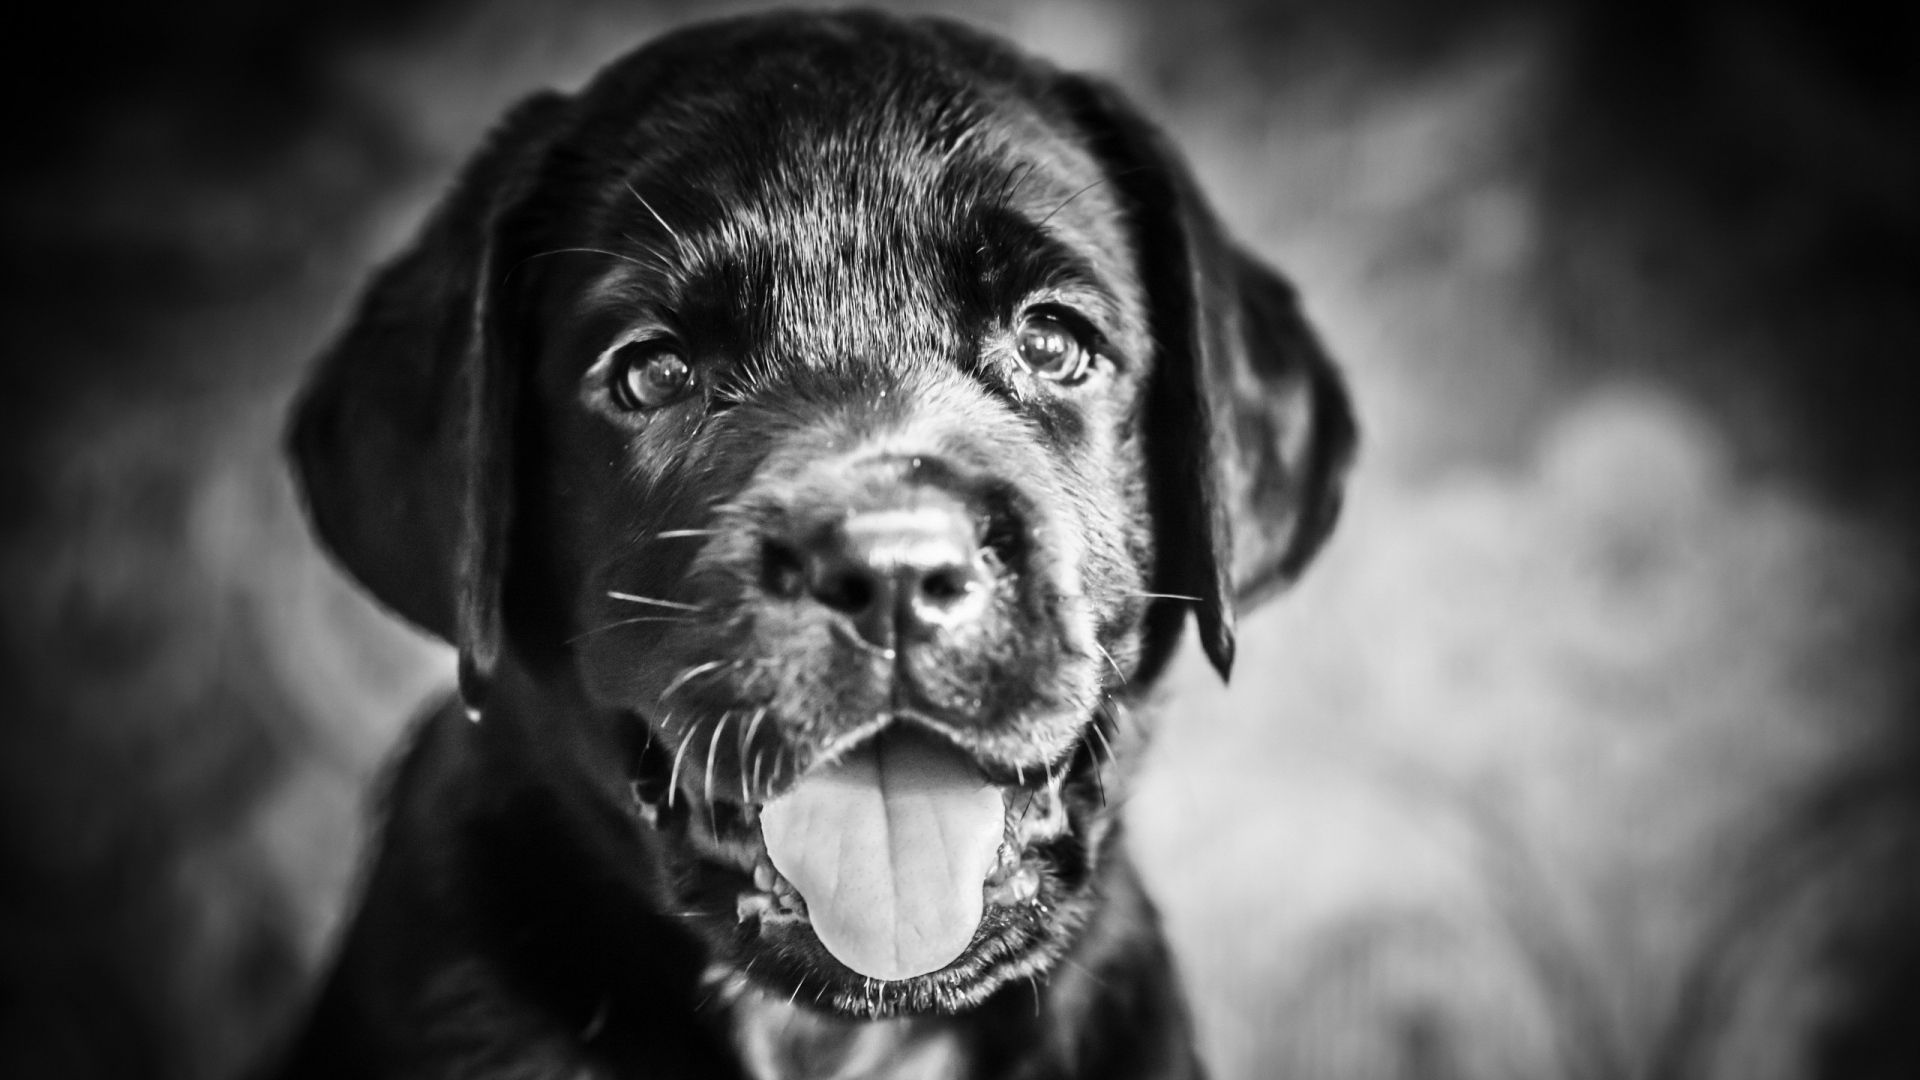 Cute Black And White full hd wallpaper for laptop